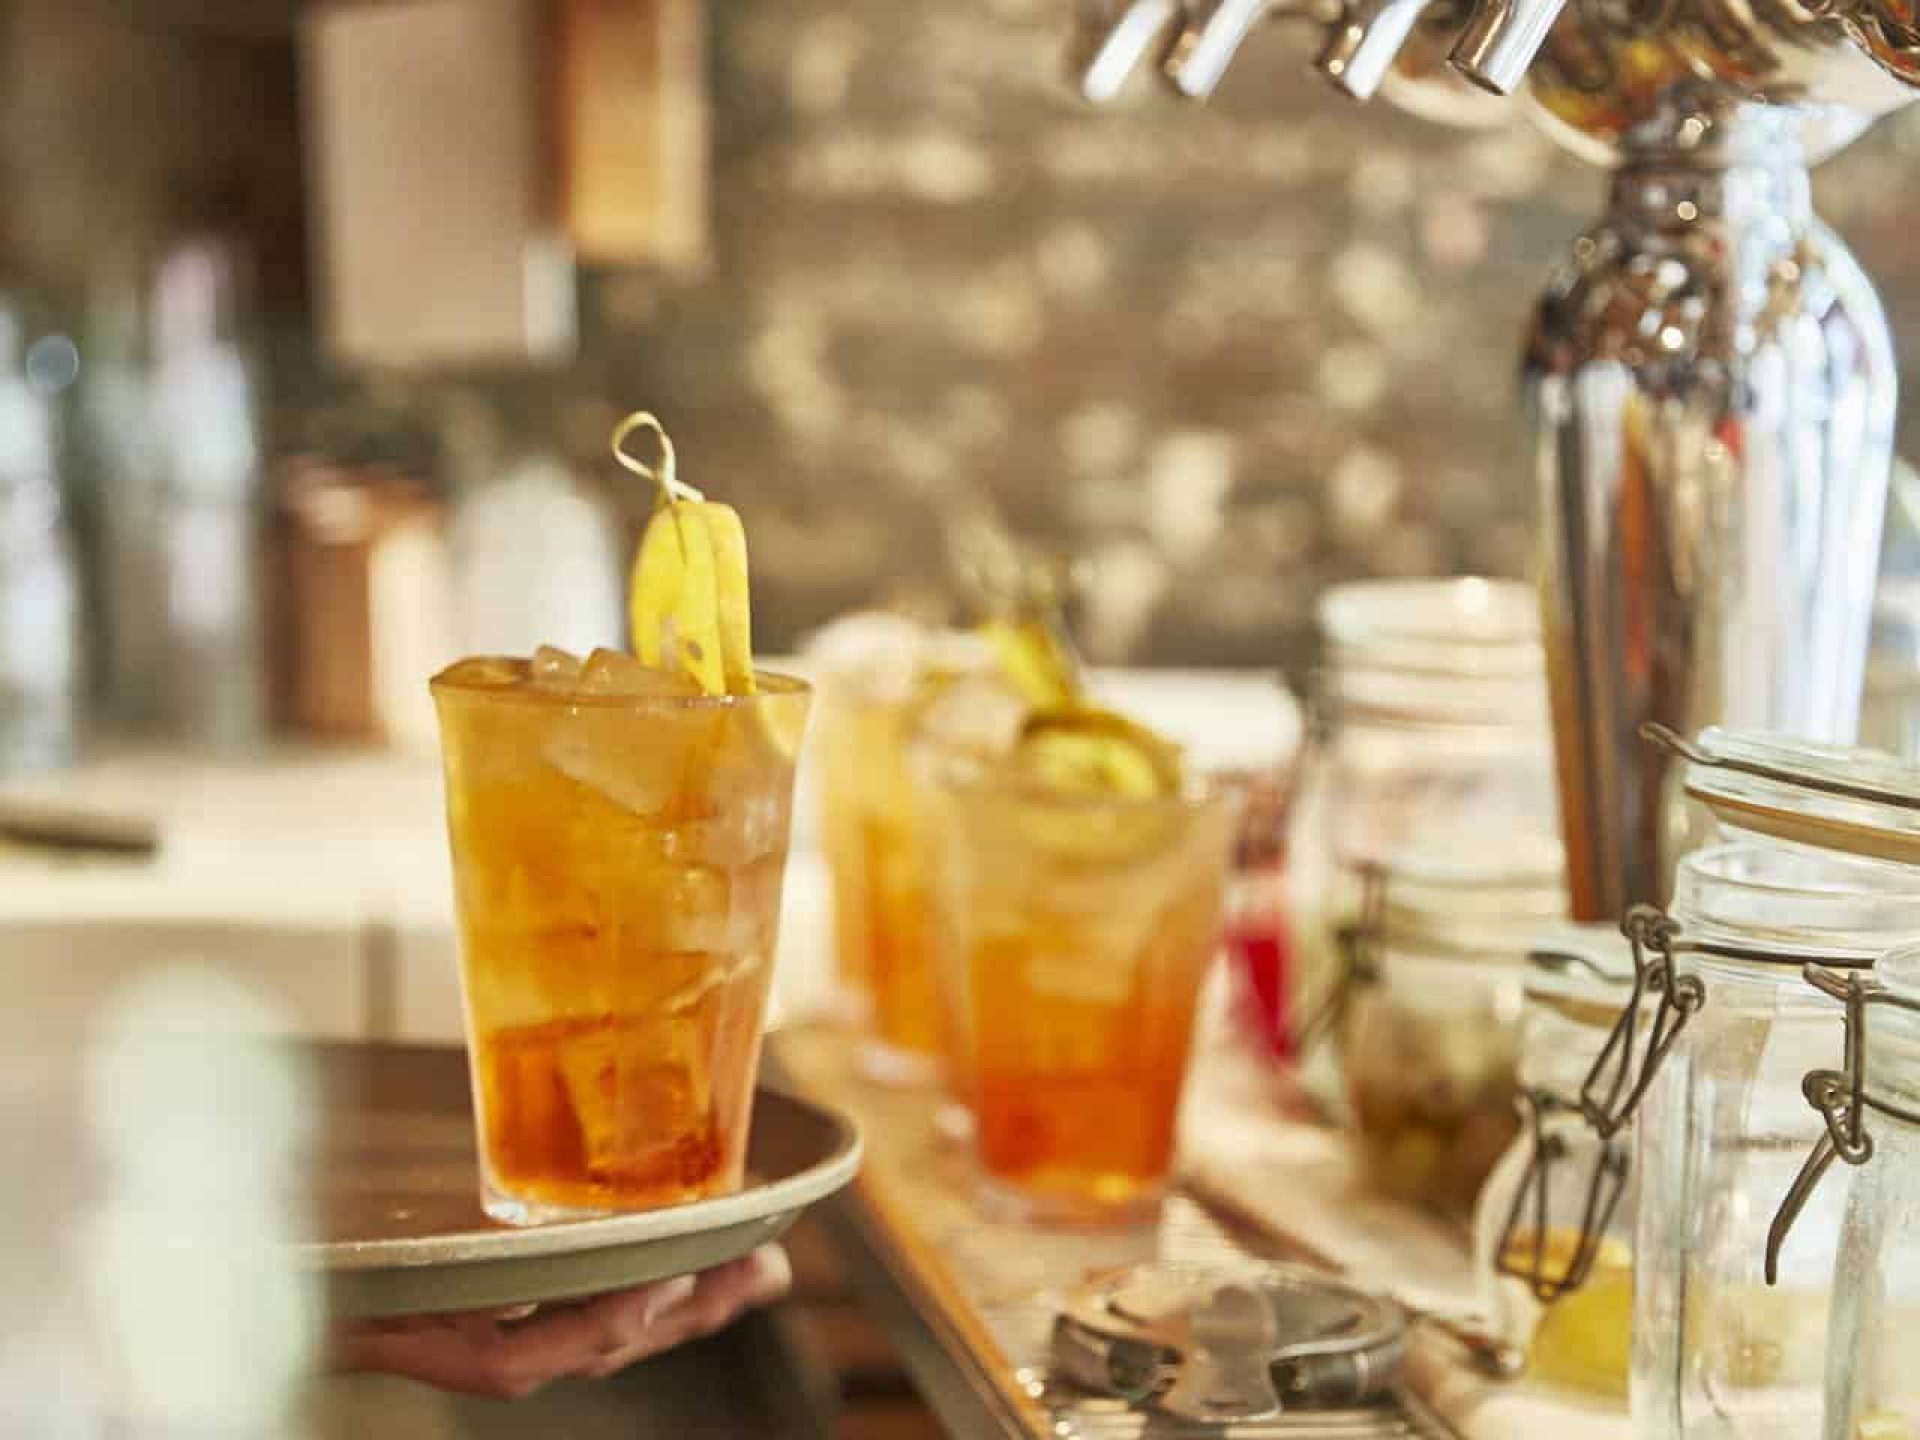 Close up of cocktails on a bar with one on a tray and three on the counter in the background below beer taps.